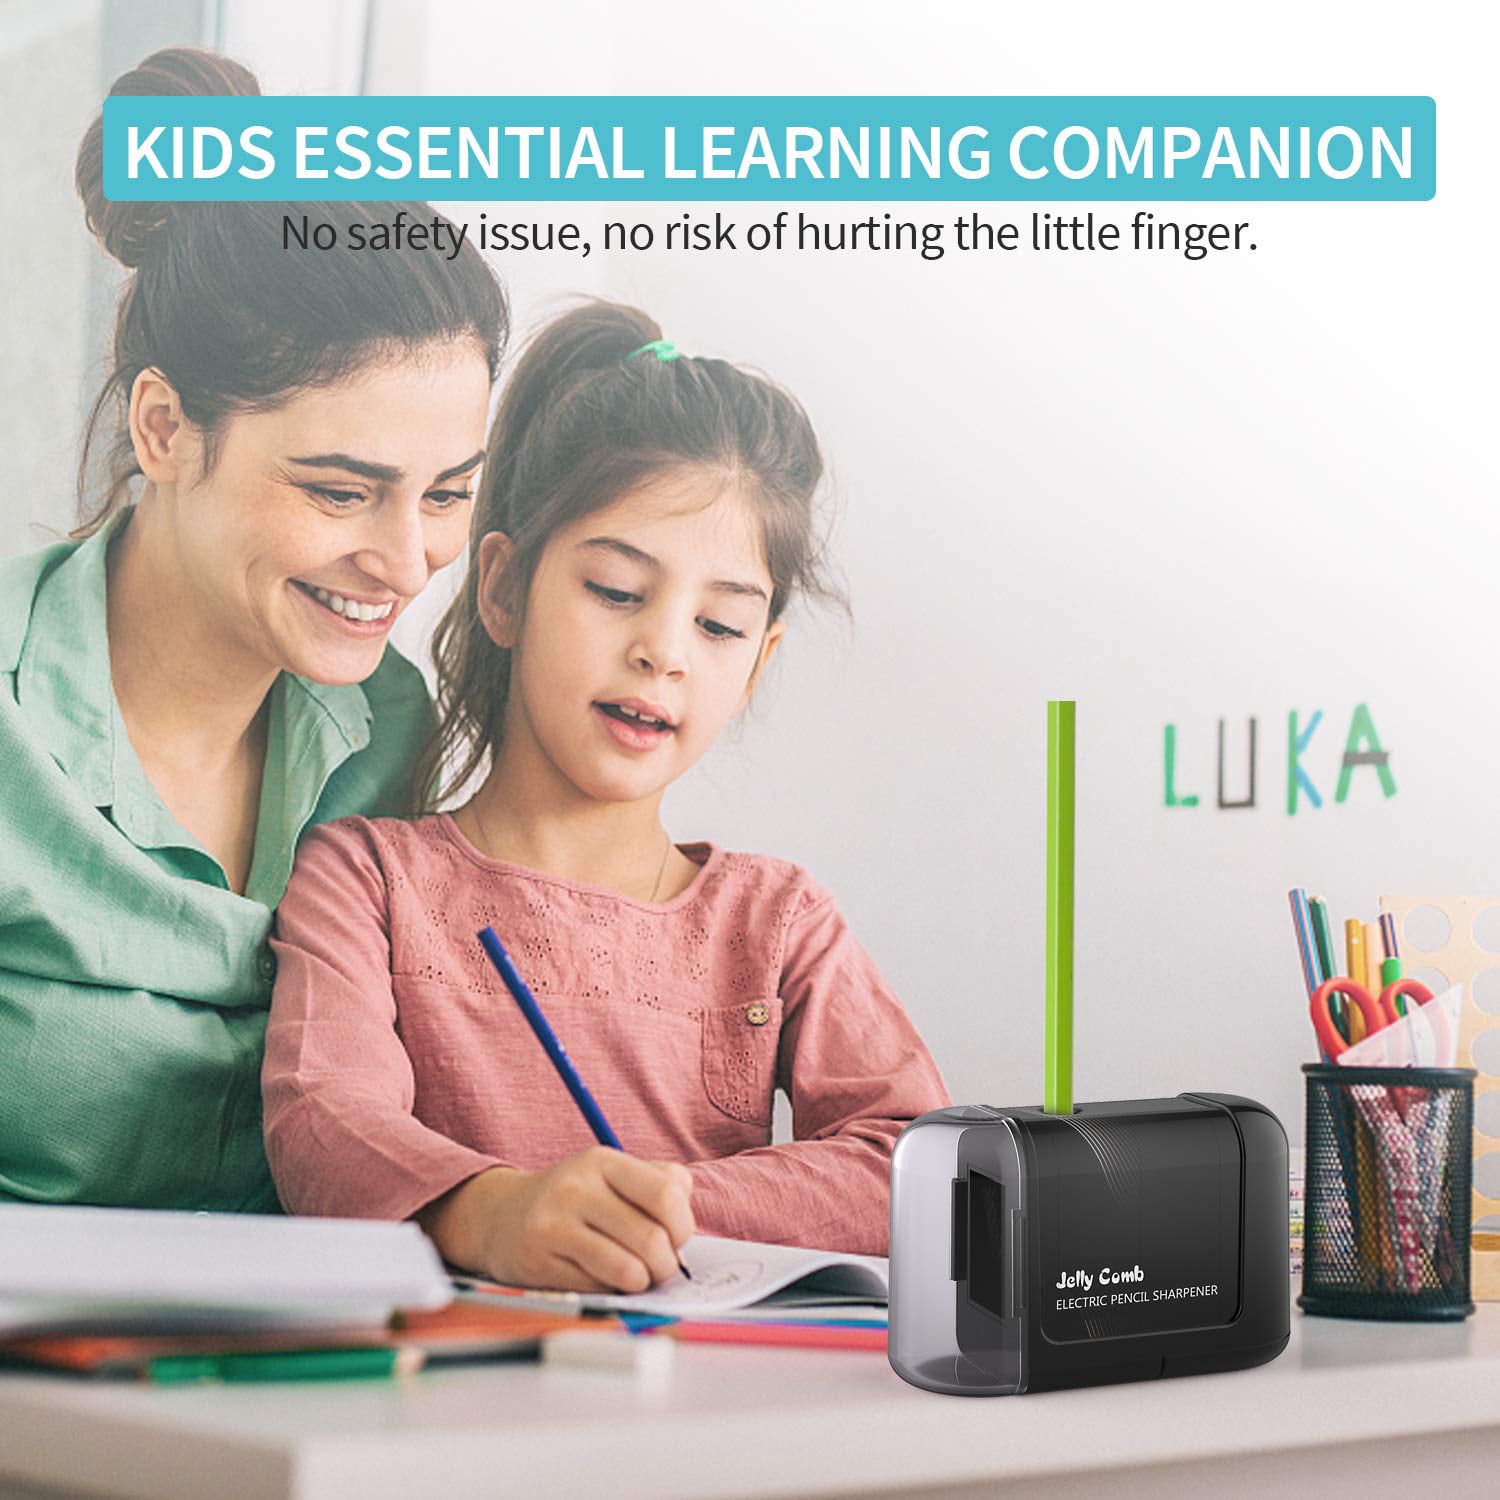 Office Electric Pencil Sharpener Jelly Comb Battery Operated Pencil Sharpener Ideal for No.2 and Colored Pencils No Cord Students Safety Design for Classroom,Home Artist